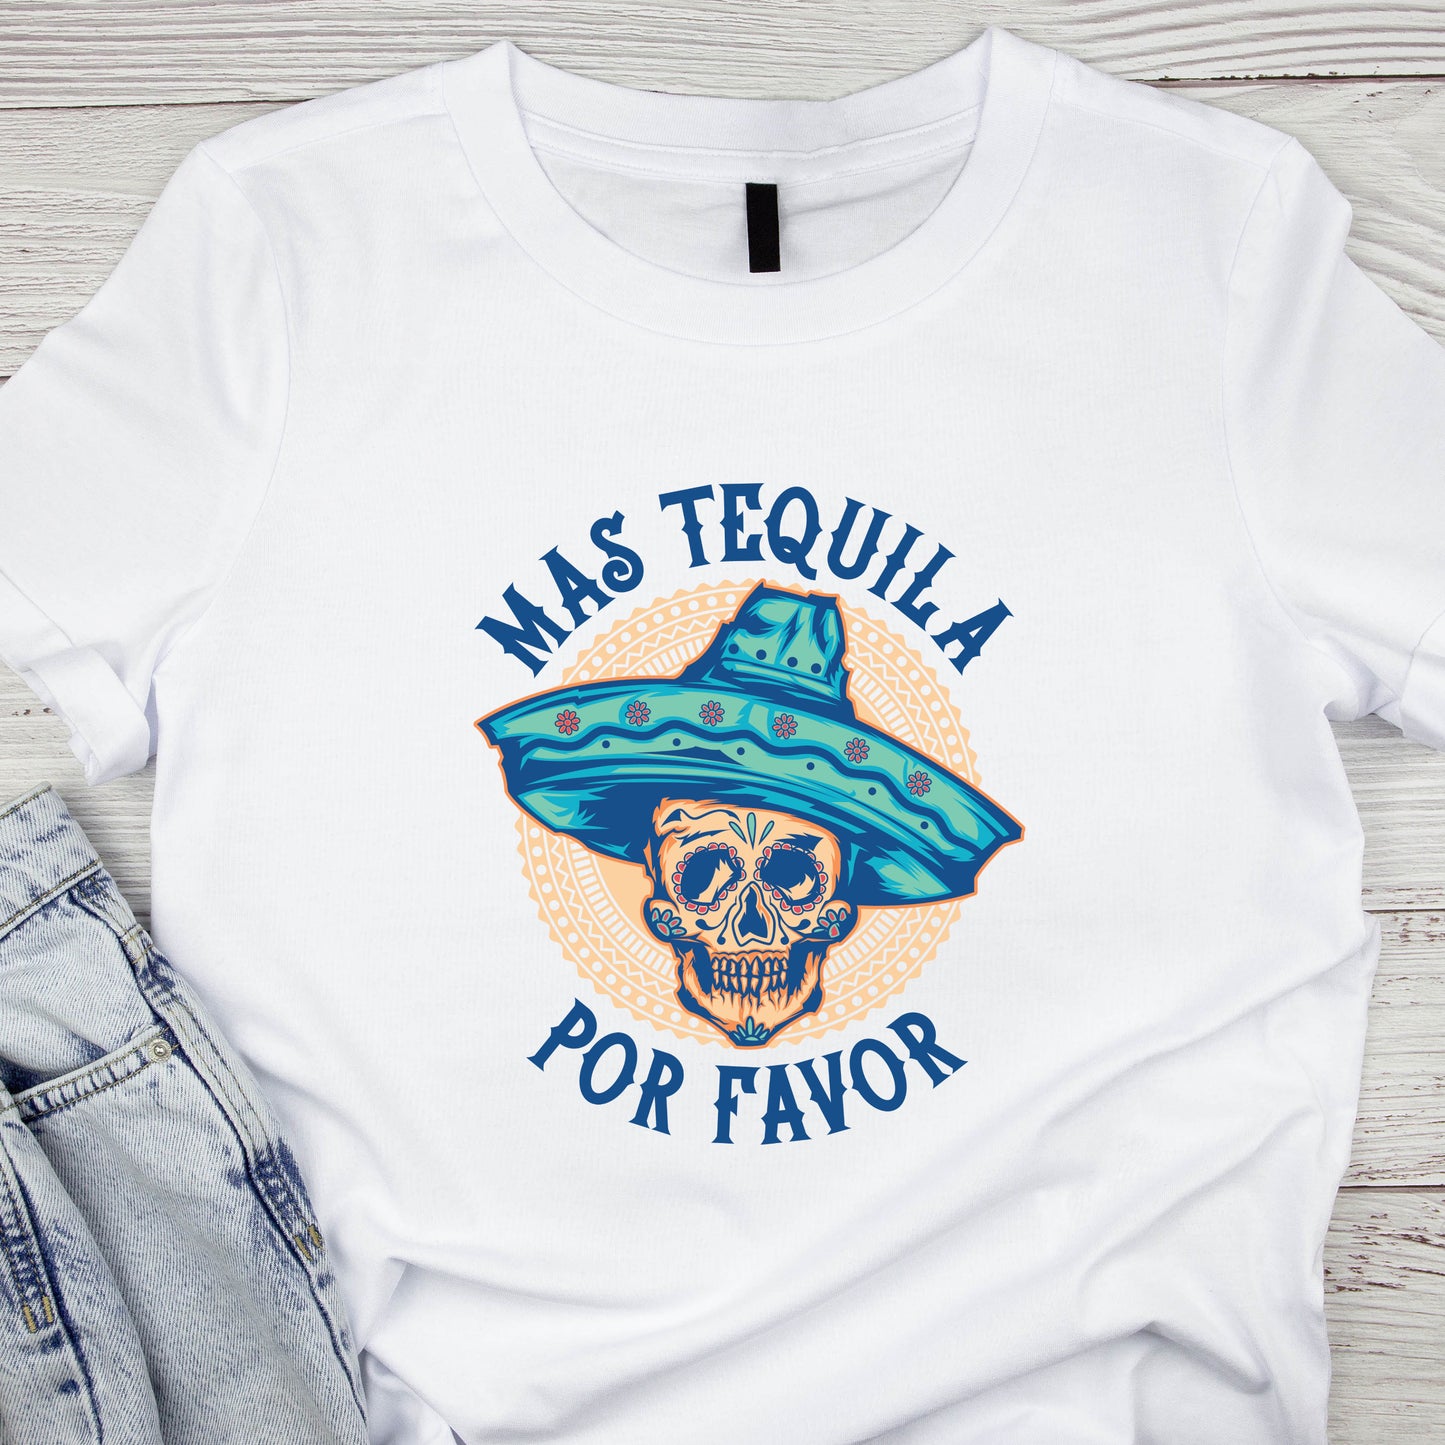 Tequila T-Shirt For Cinco De Mayo T Shirt For Party TShirt For Funny Tequila T-Shirt For Party Gift For Alcohol Gift For Summer Shirt